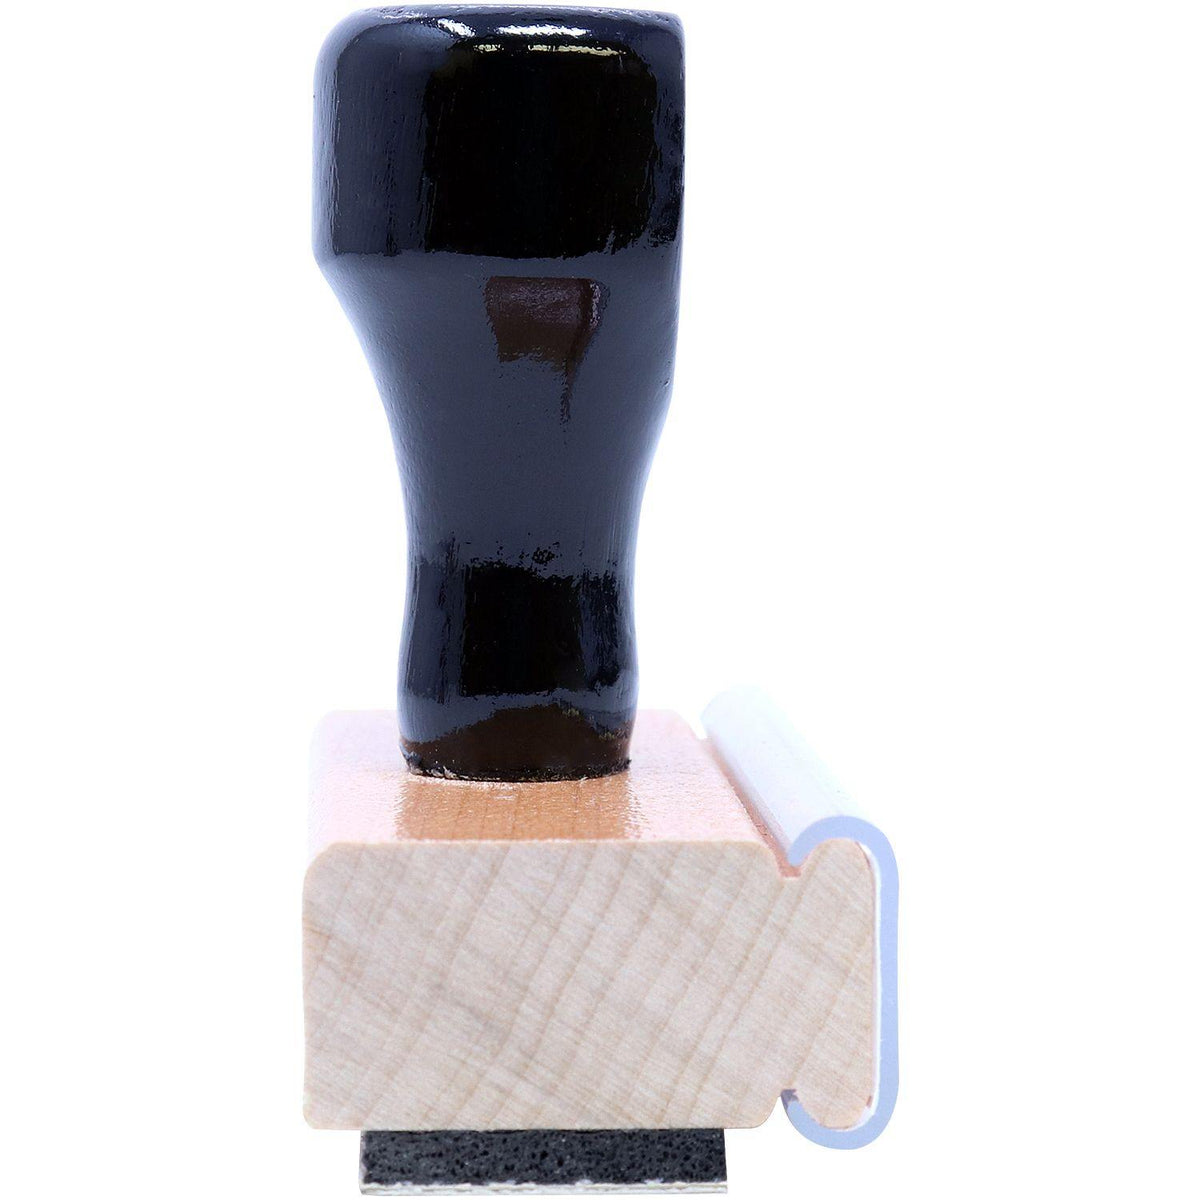 Side View of Large Narrow Font Cancelled Rubber Stamp